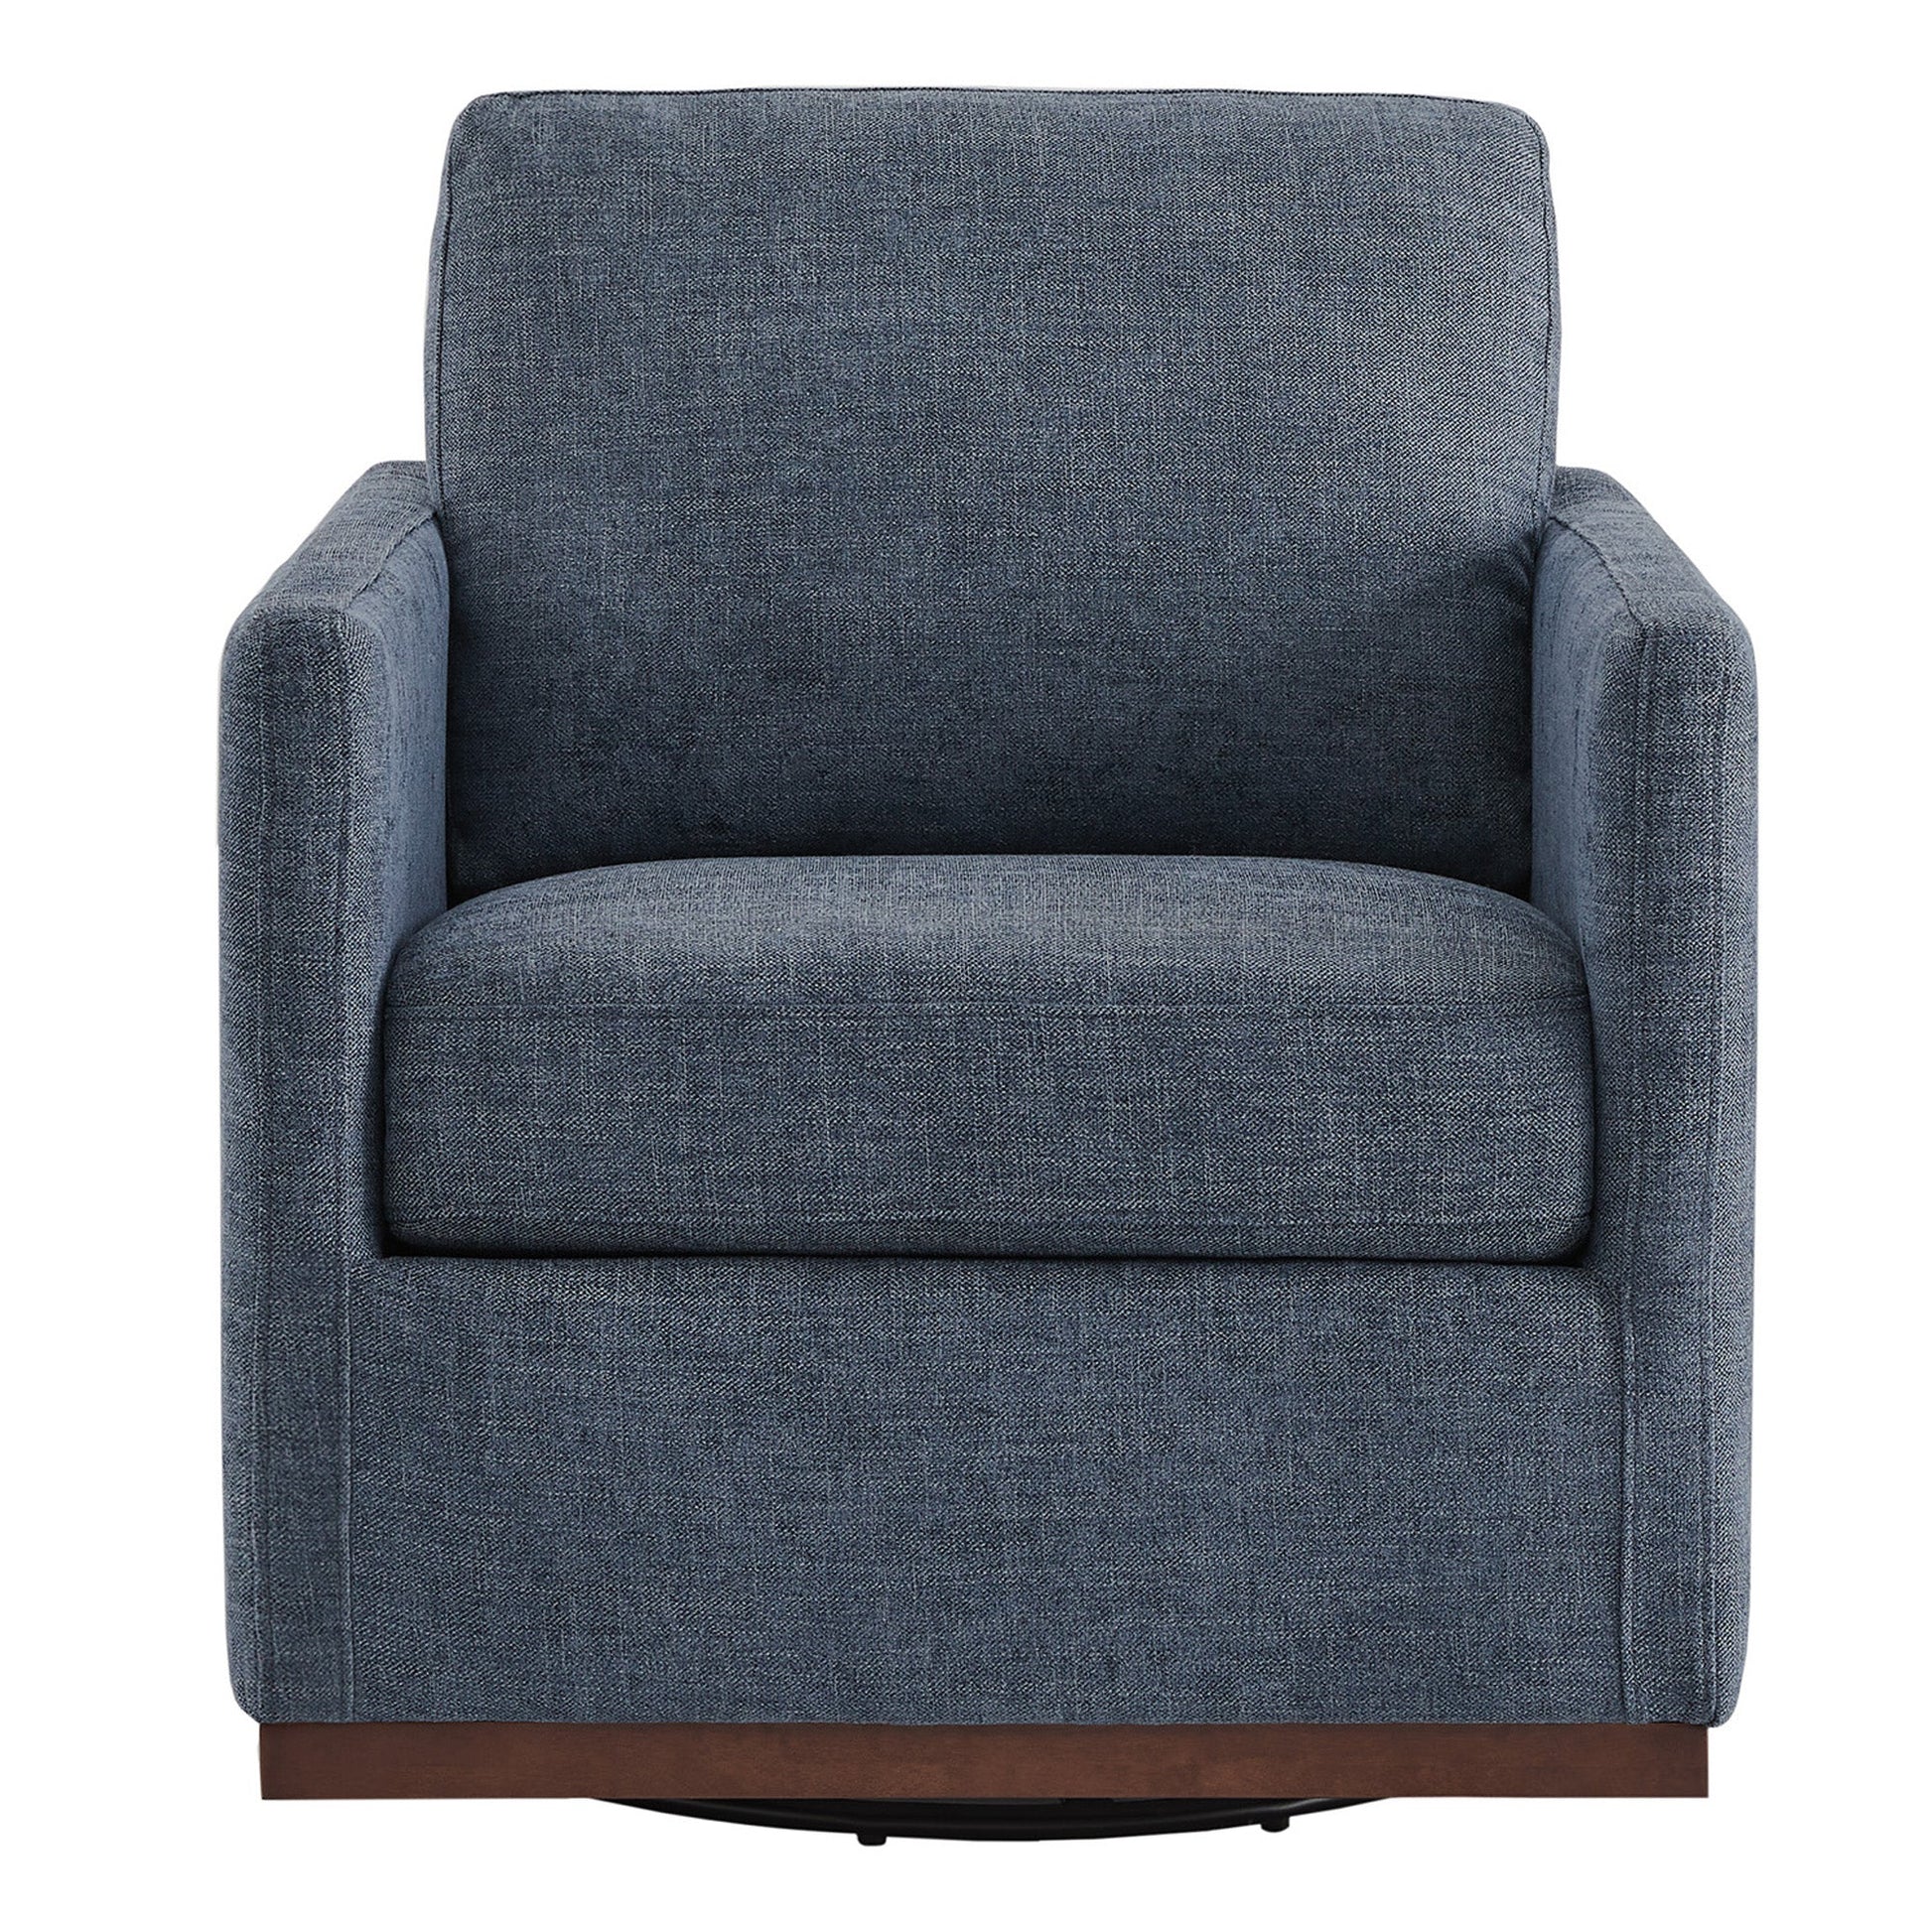 CHITA LIVING-Henry Swivel Accent Chair-Accent Chair-Fabric-Blue-